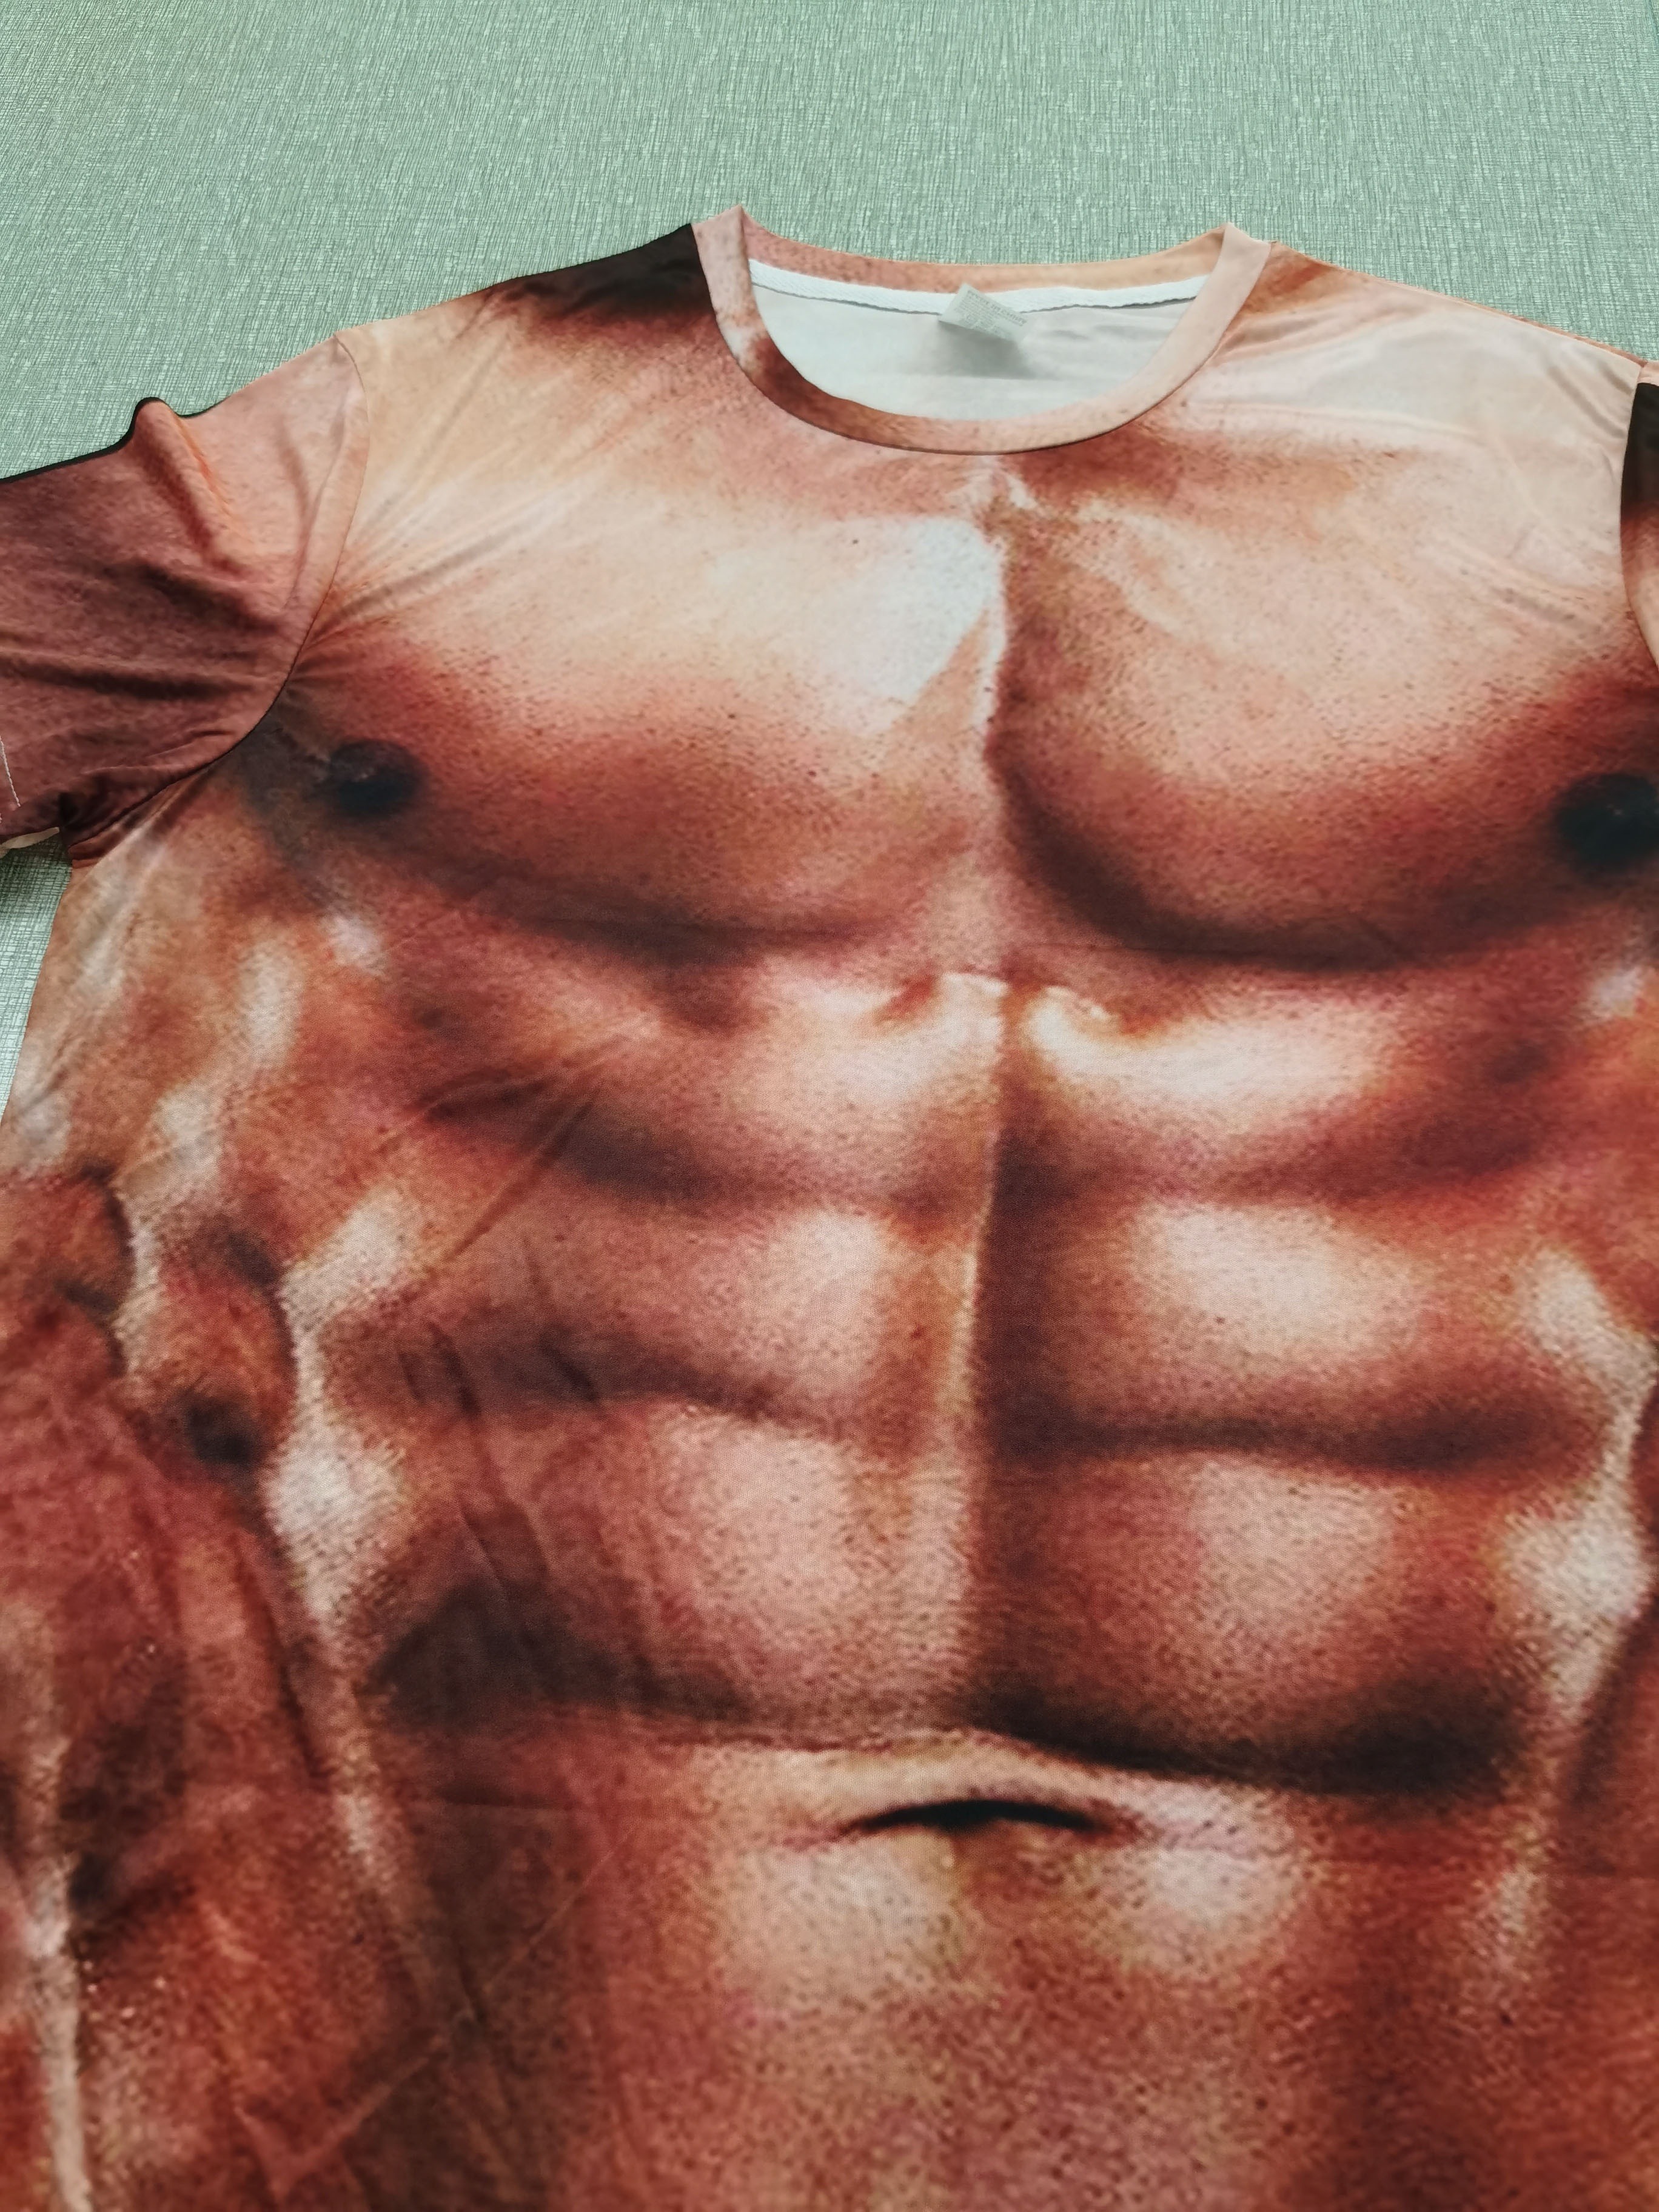  Funny Fake Six Pack Abs T-Shirt Big Muscle Chest